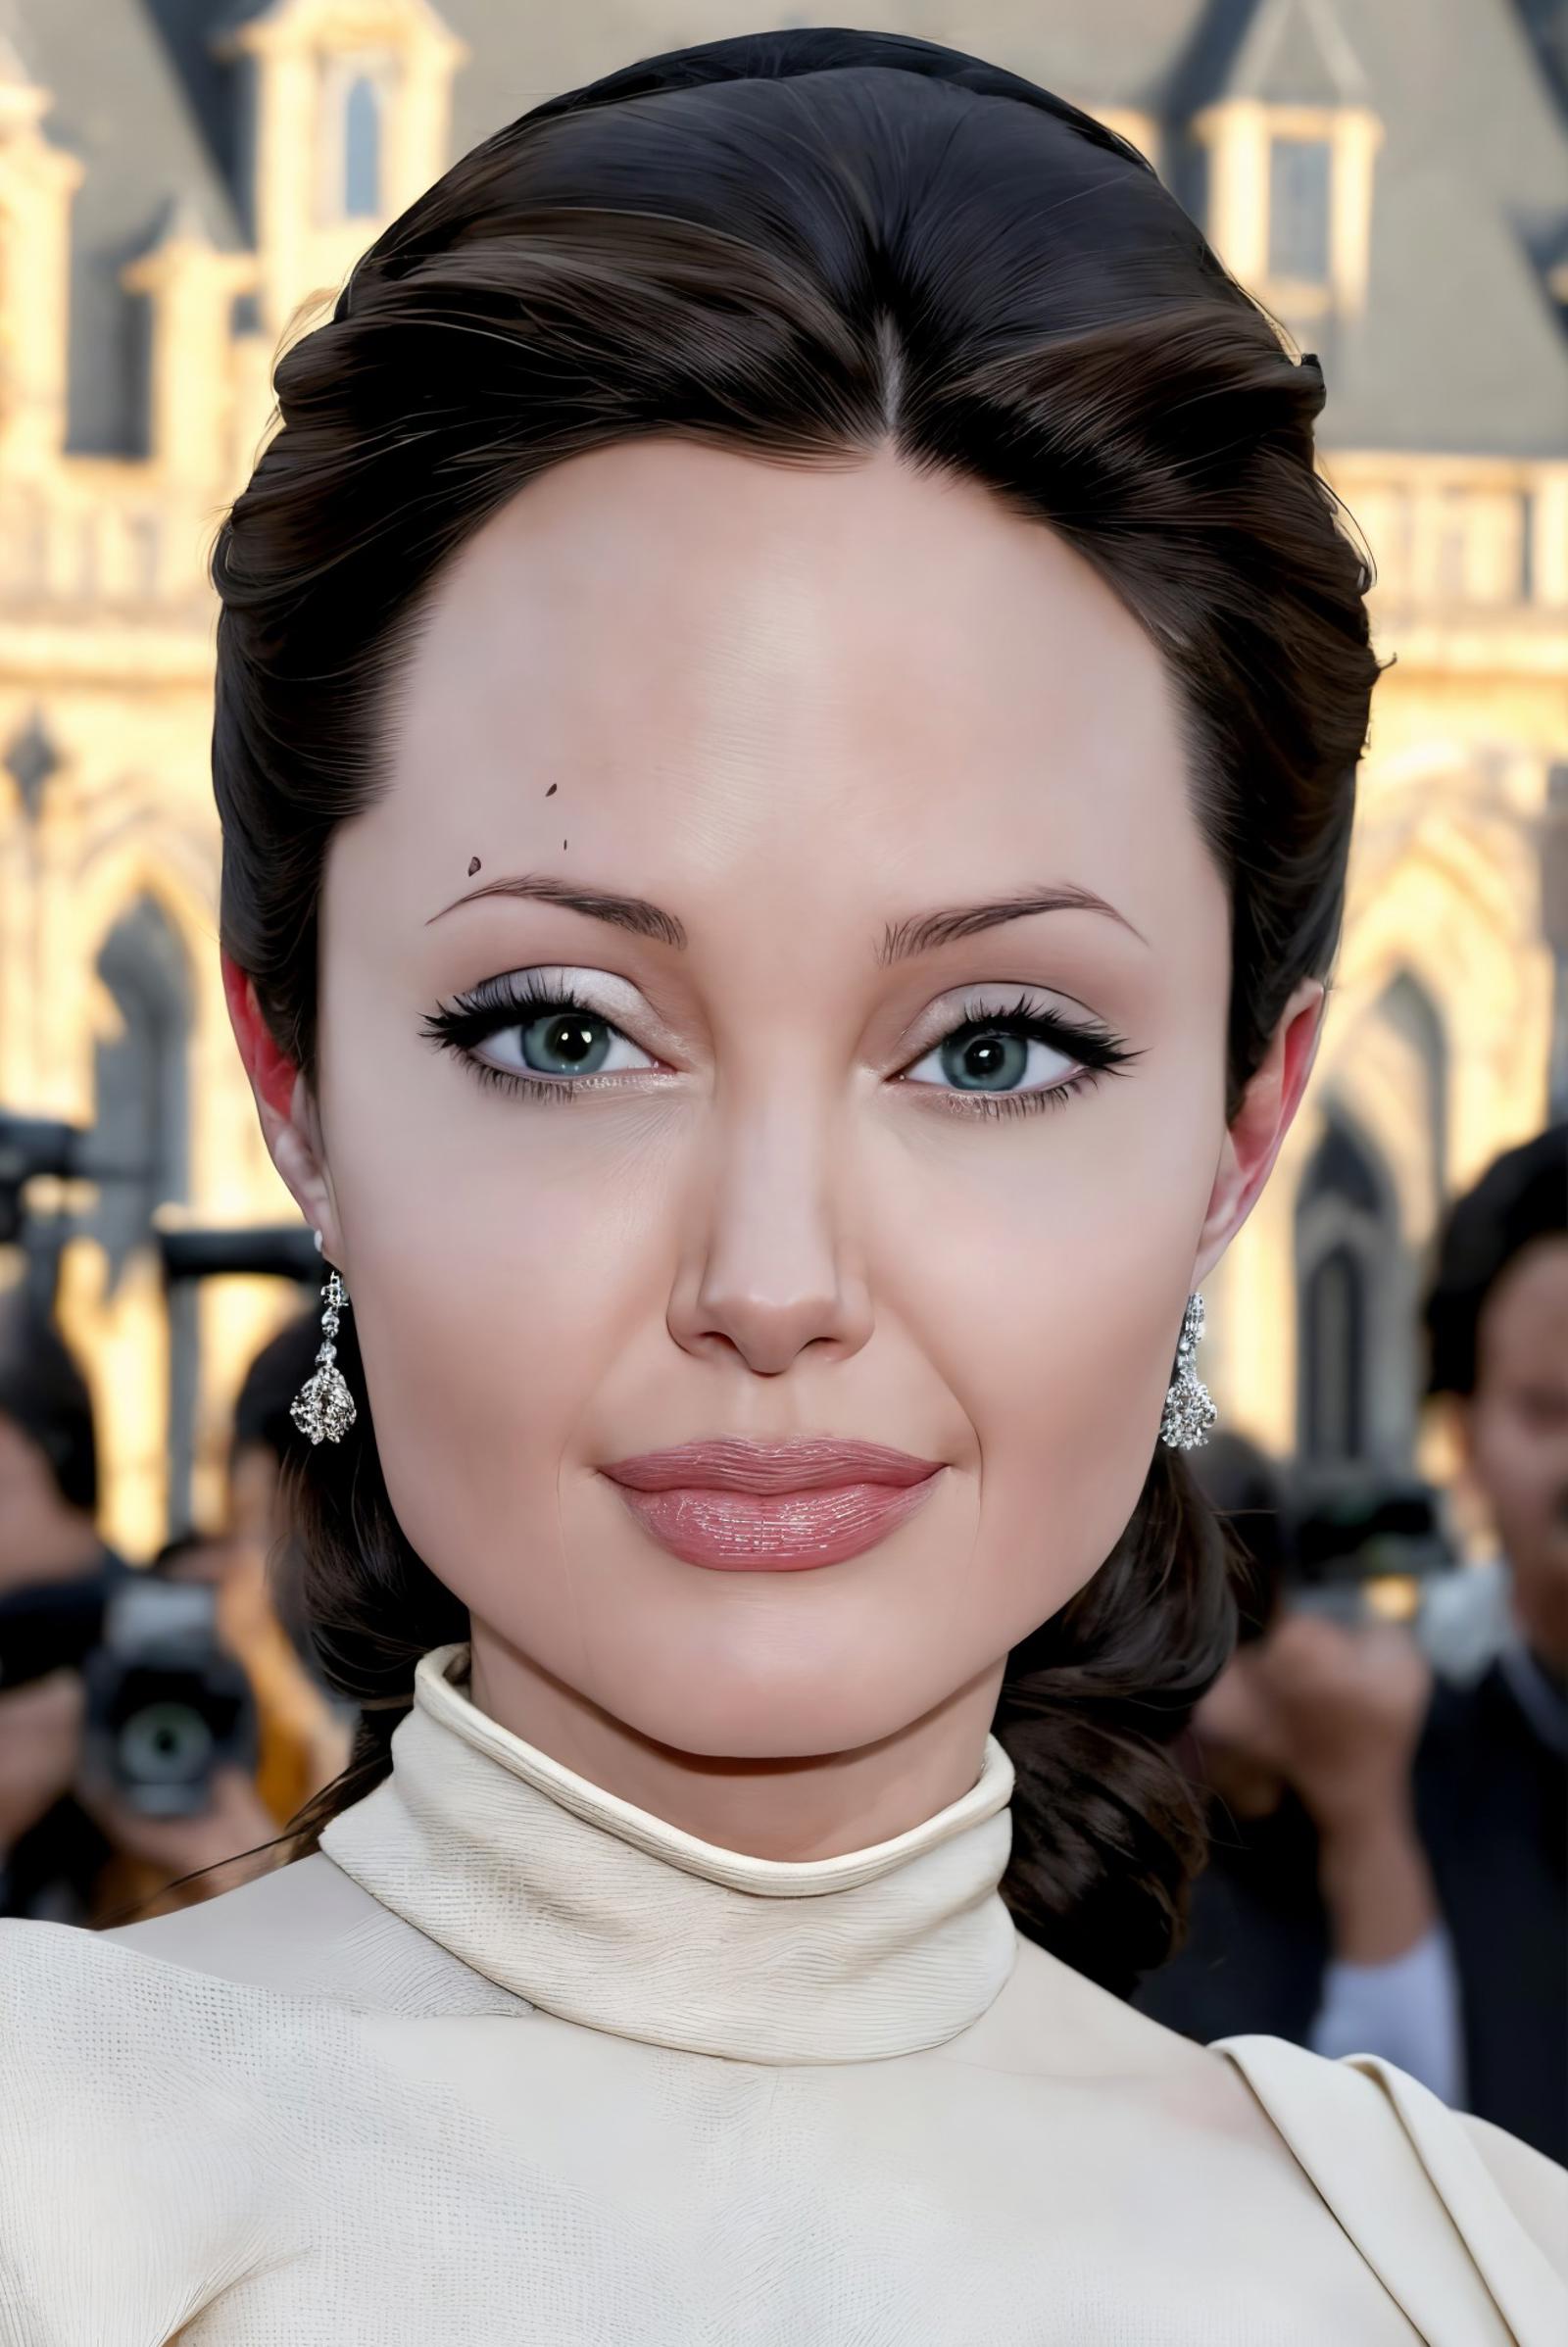 Angelina Jolie [SD 1.5] image by alexds9